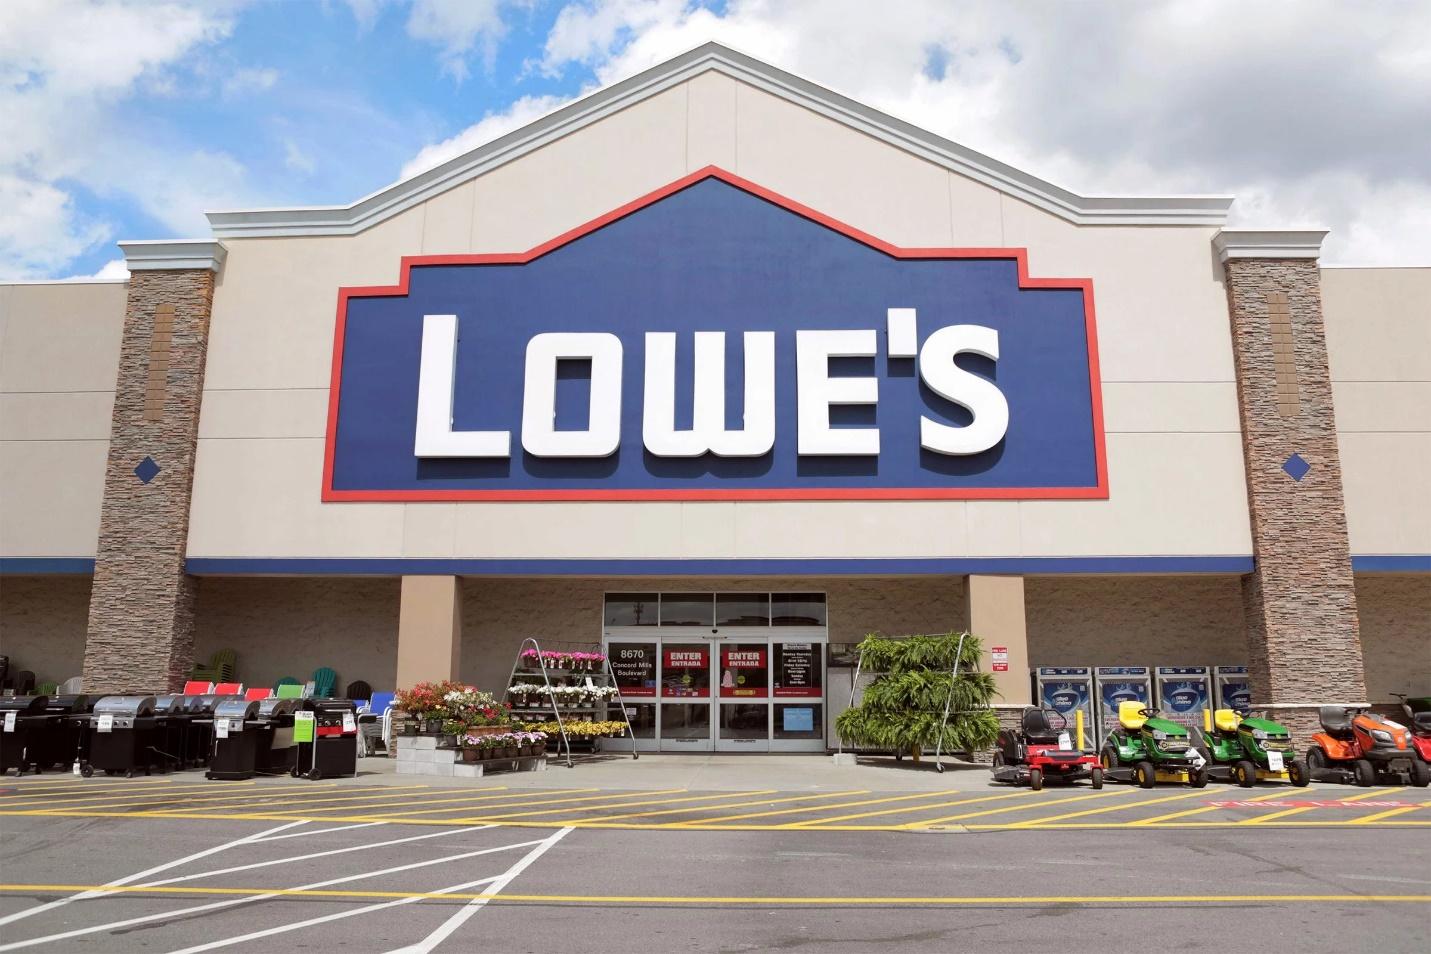 Can You Return Paint To Lowe's?